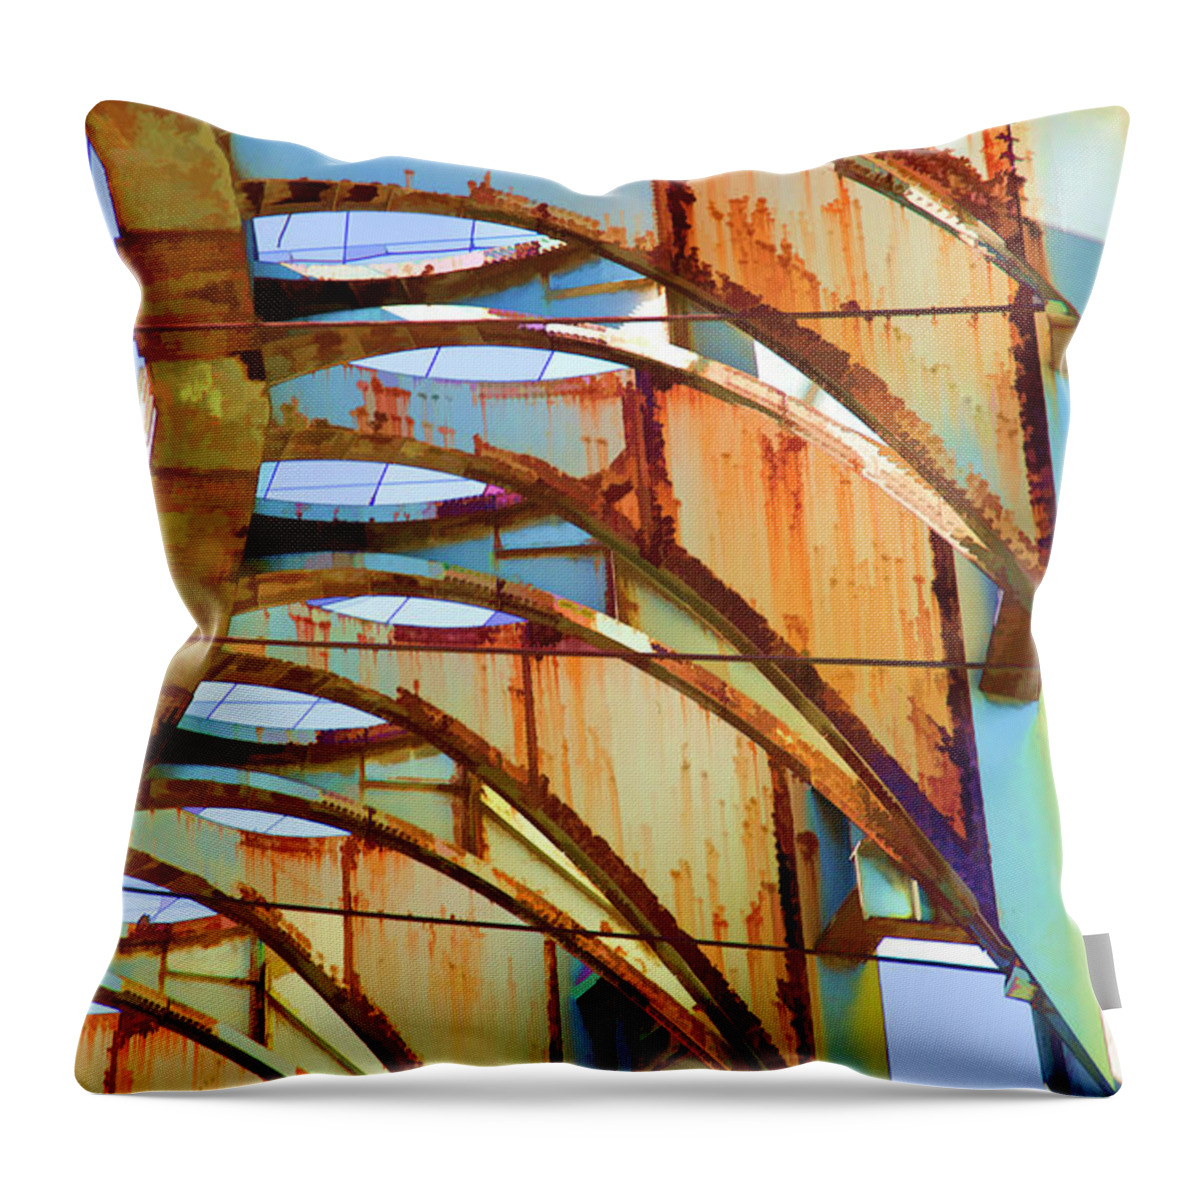 Unisphere Throw Pillow featuring the photograph Rust Pavilion World's Fair 1964 NY by Chuck Kuhn